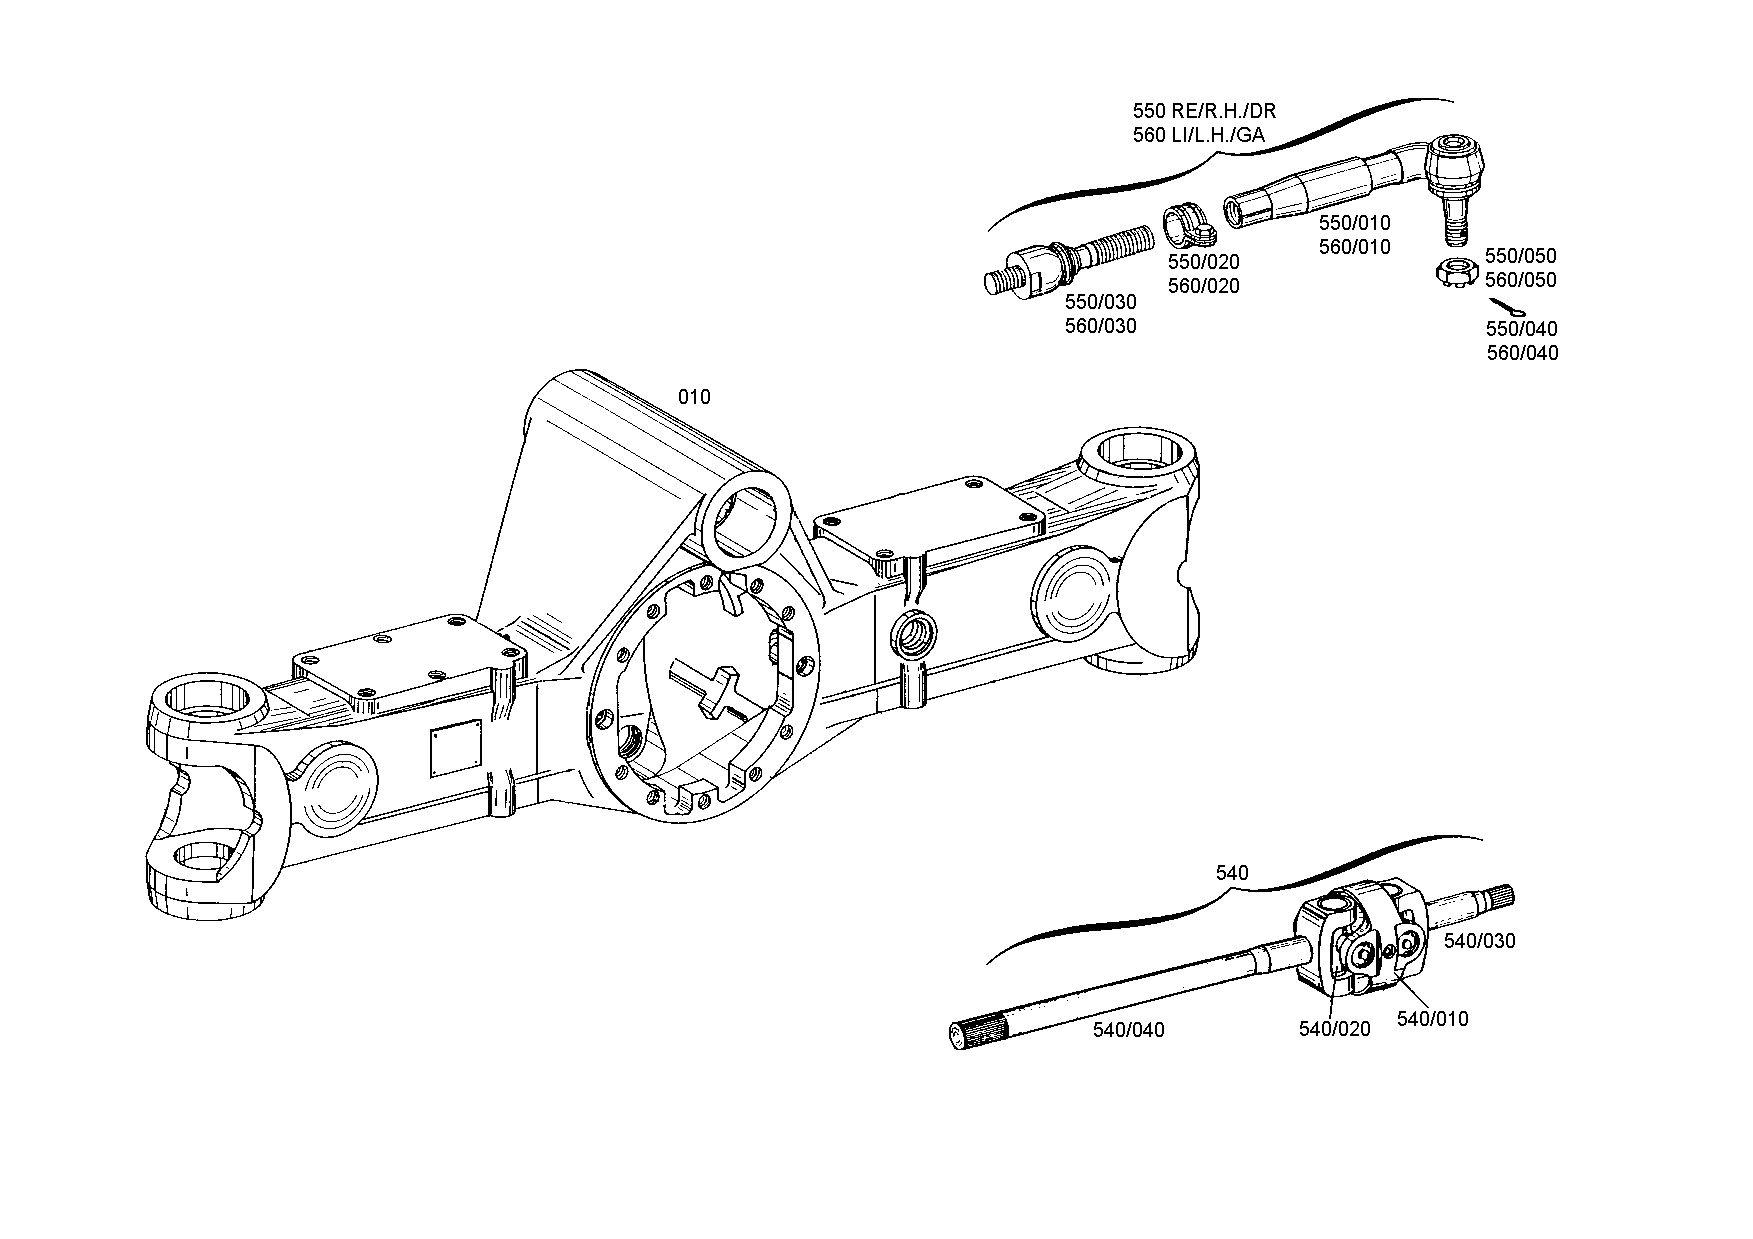 drawing for LIEBHERR GMBH 7024613 - CENTRAL PIECE (figure 1)